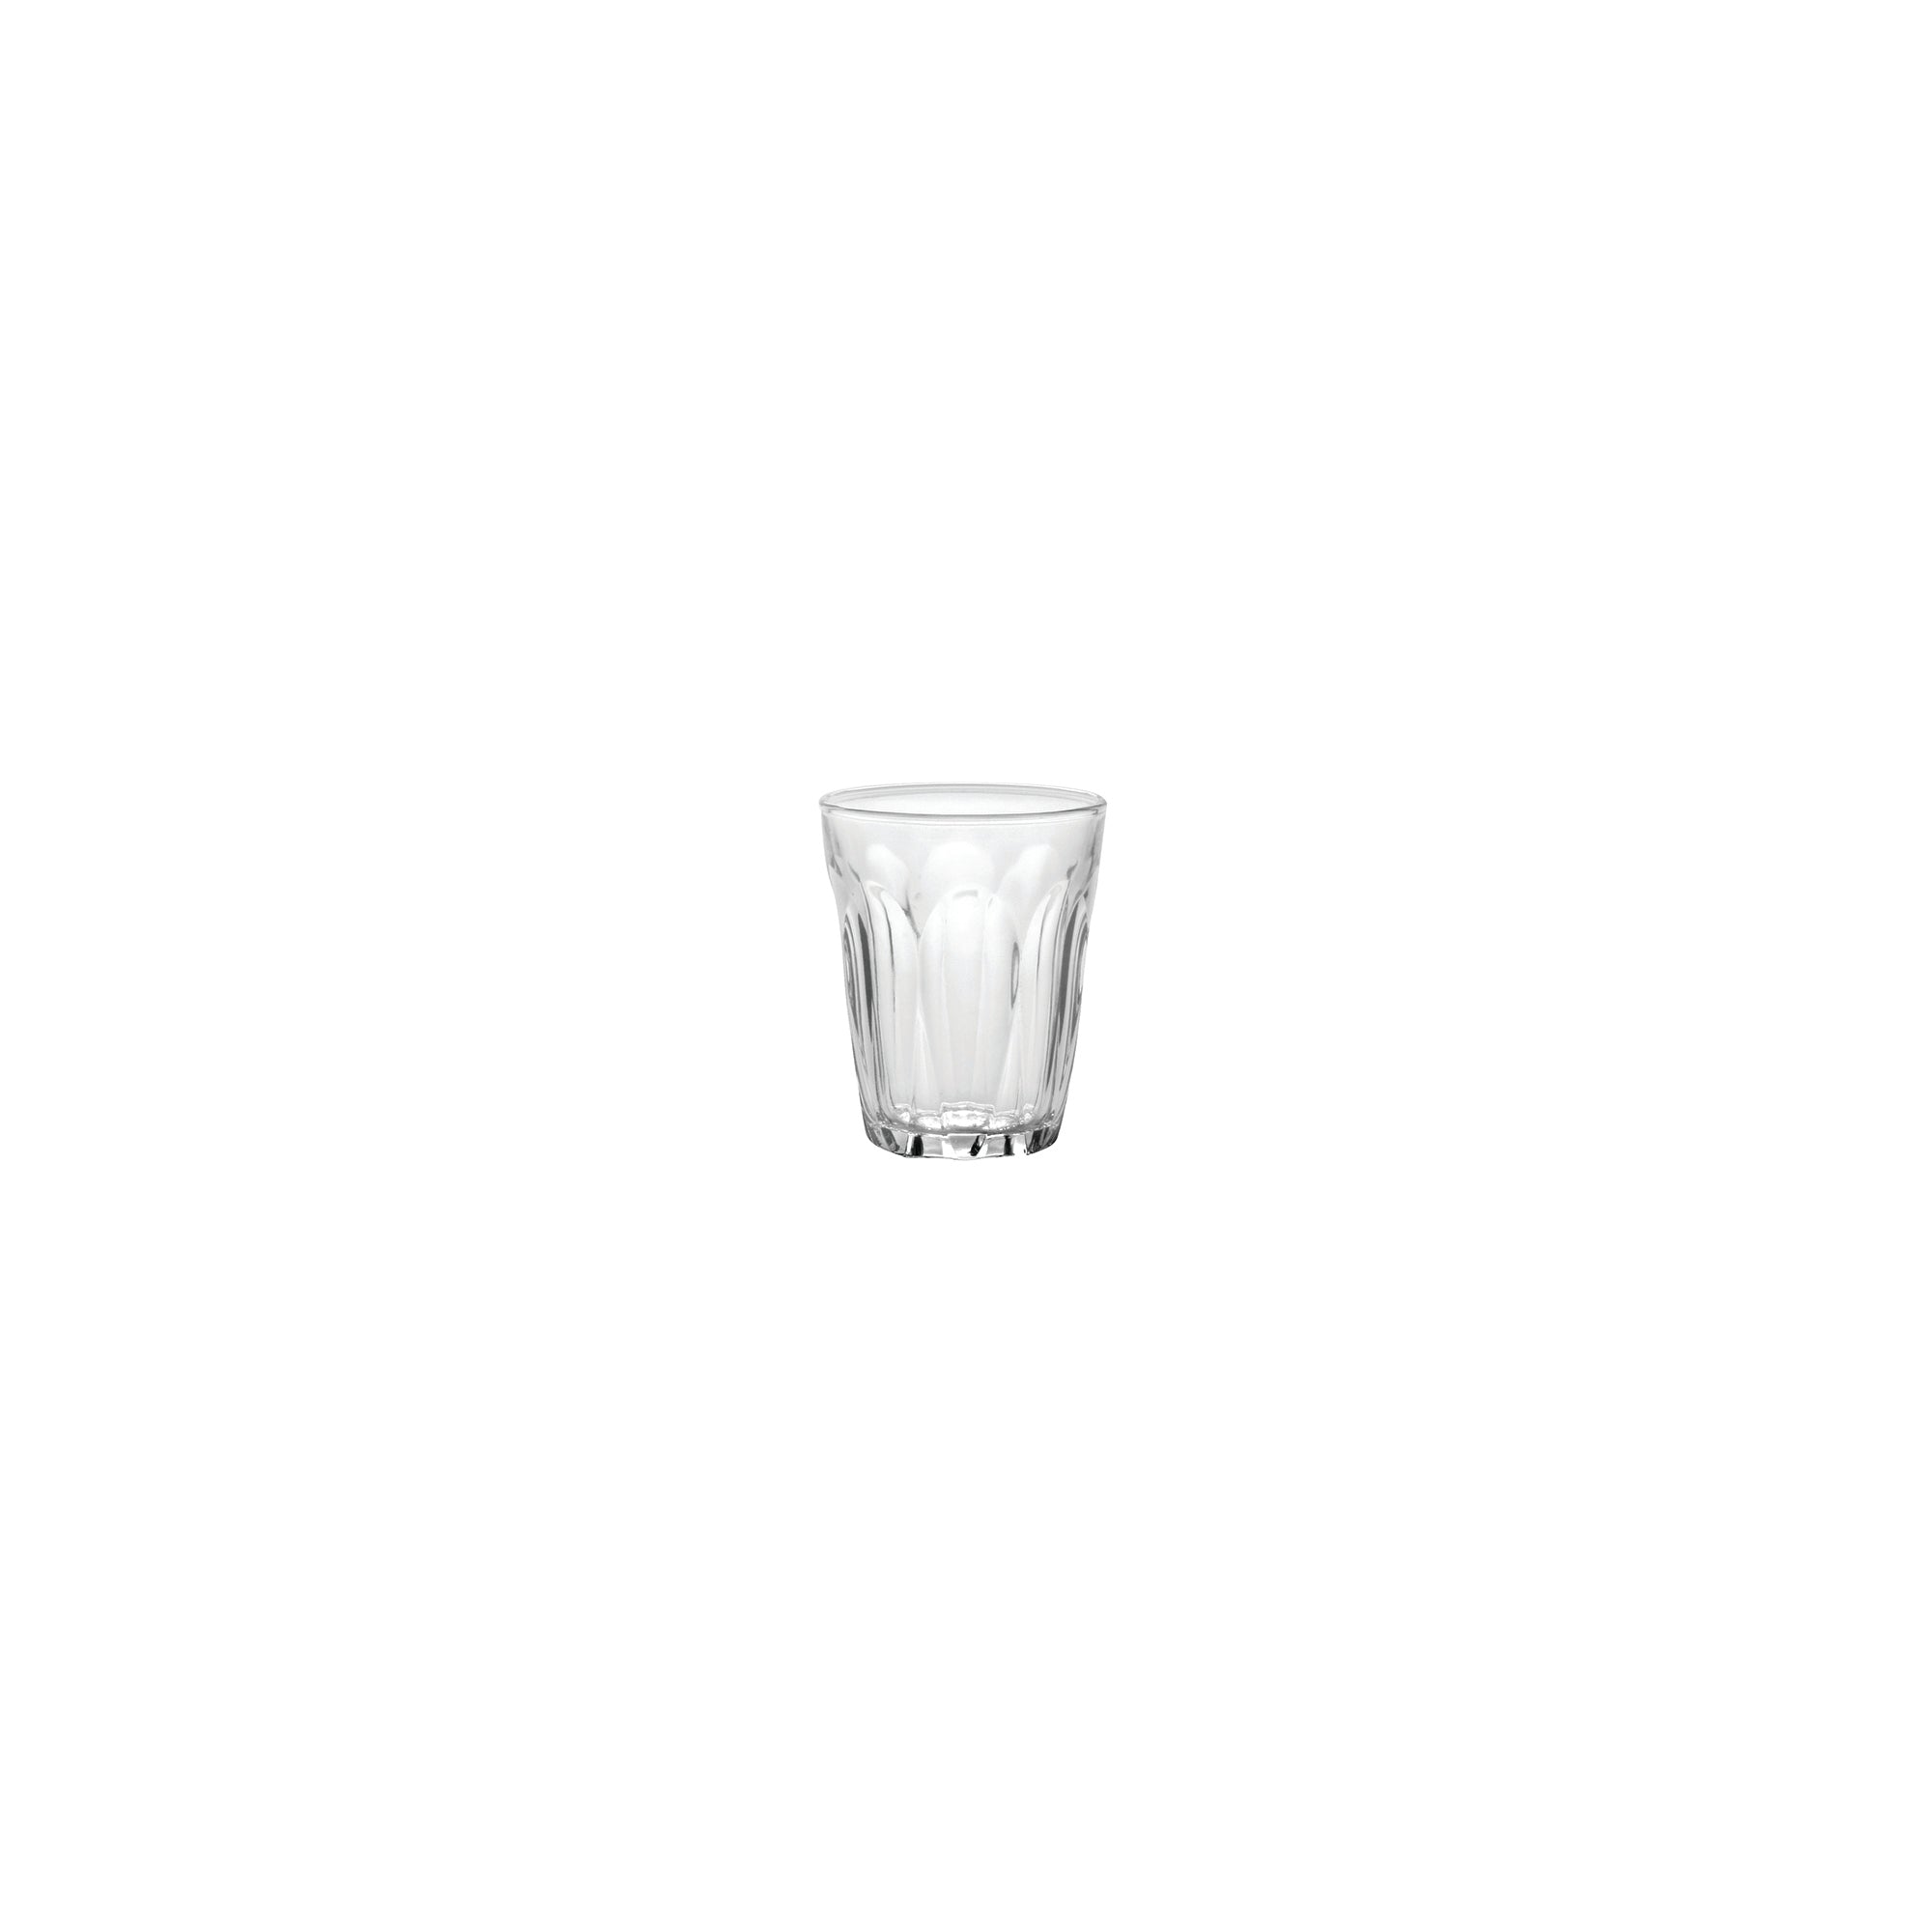 Duralex - Provence Clear Drinking Glass Tumbler, 4.5oz. (130ml) Set of –  Wine And Tableware